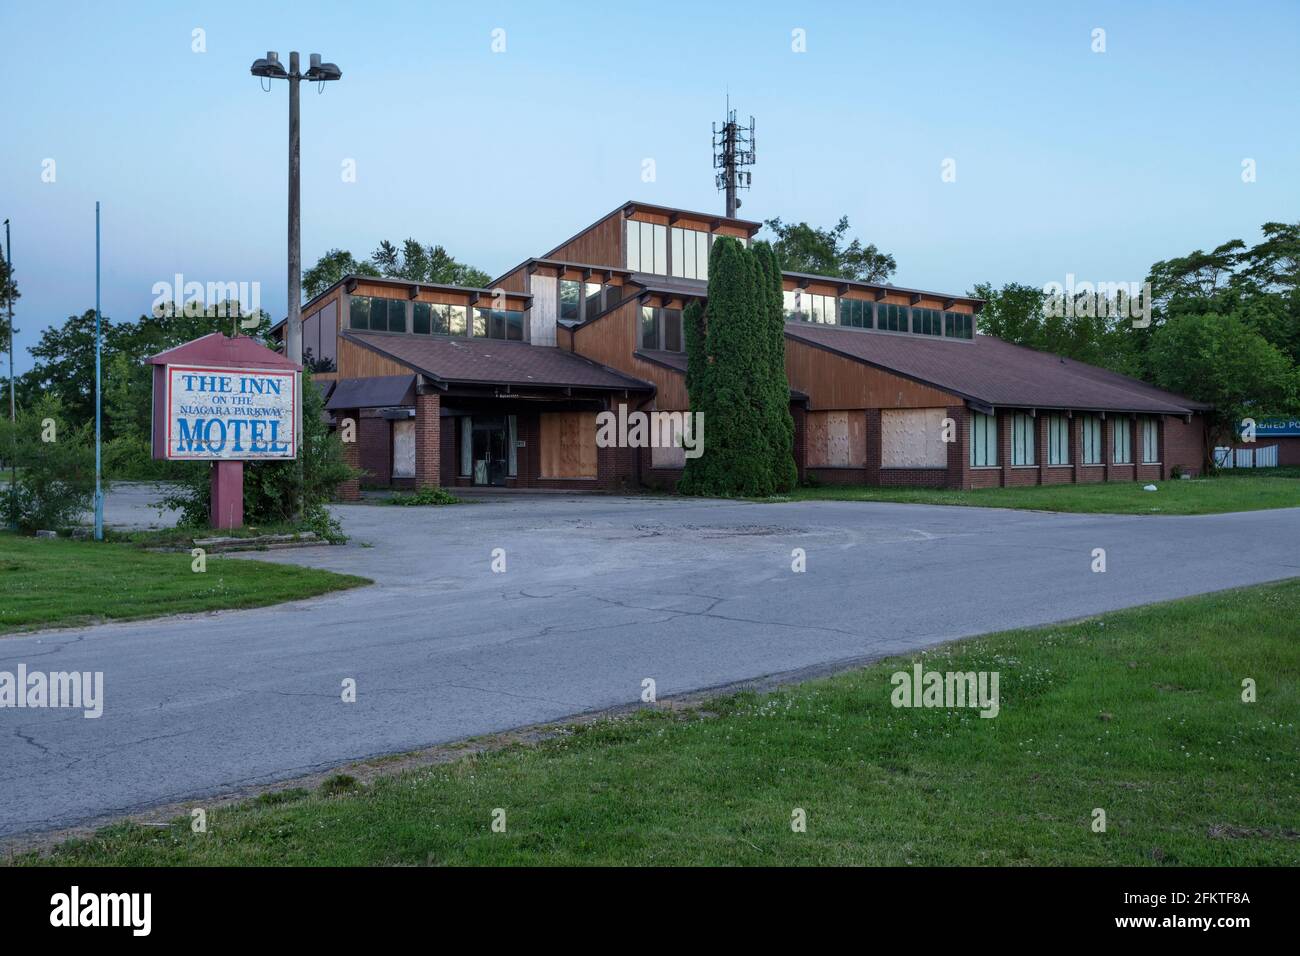 The abandoned Inn on the Niagara Parkway Motel in Chippawa, Niagara Falls, Ontario, Canada.  This building has been demolished and no longer exists. Stock Photo